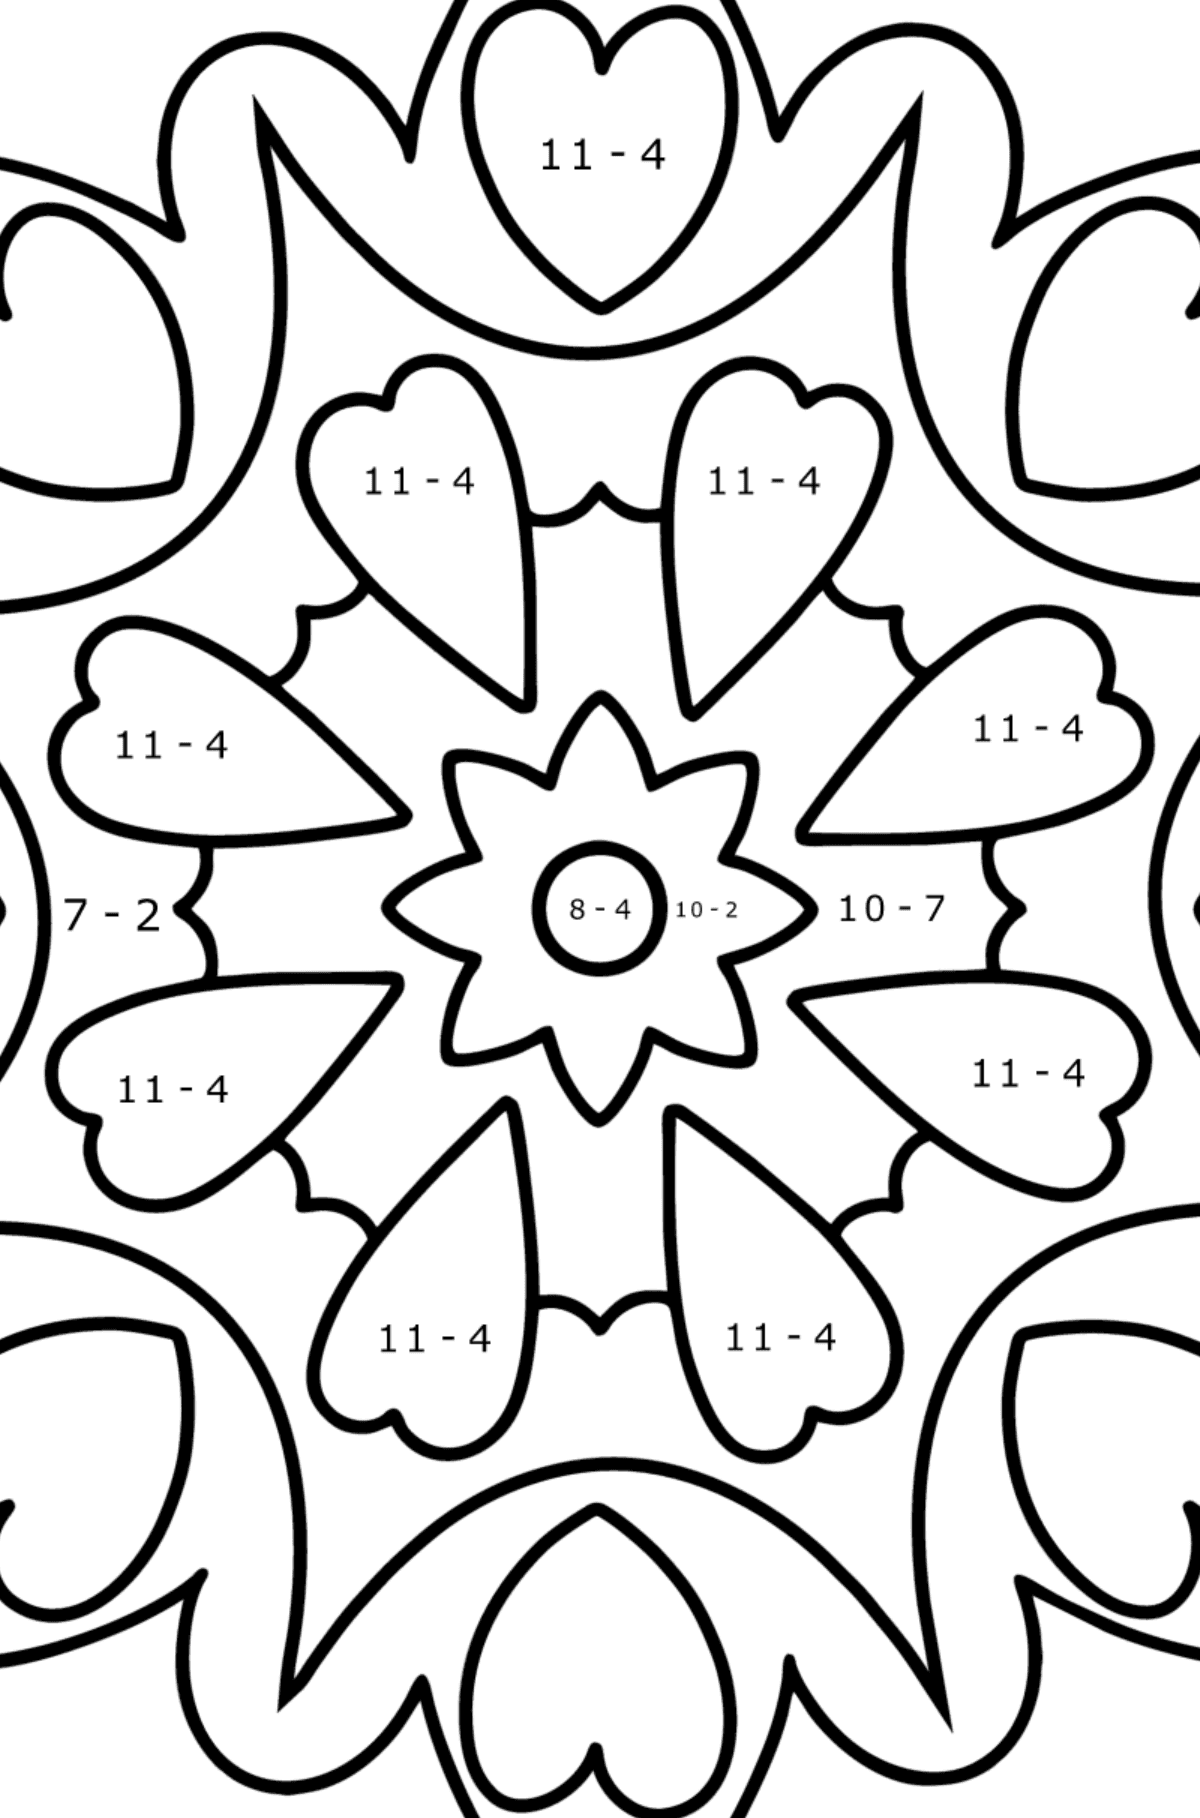 Mandala coloring page - 21 elements - Math Coloring - Subtraction for Kids